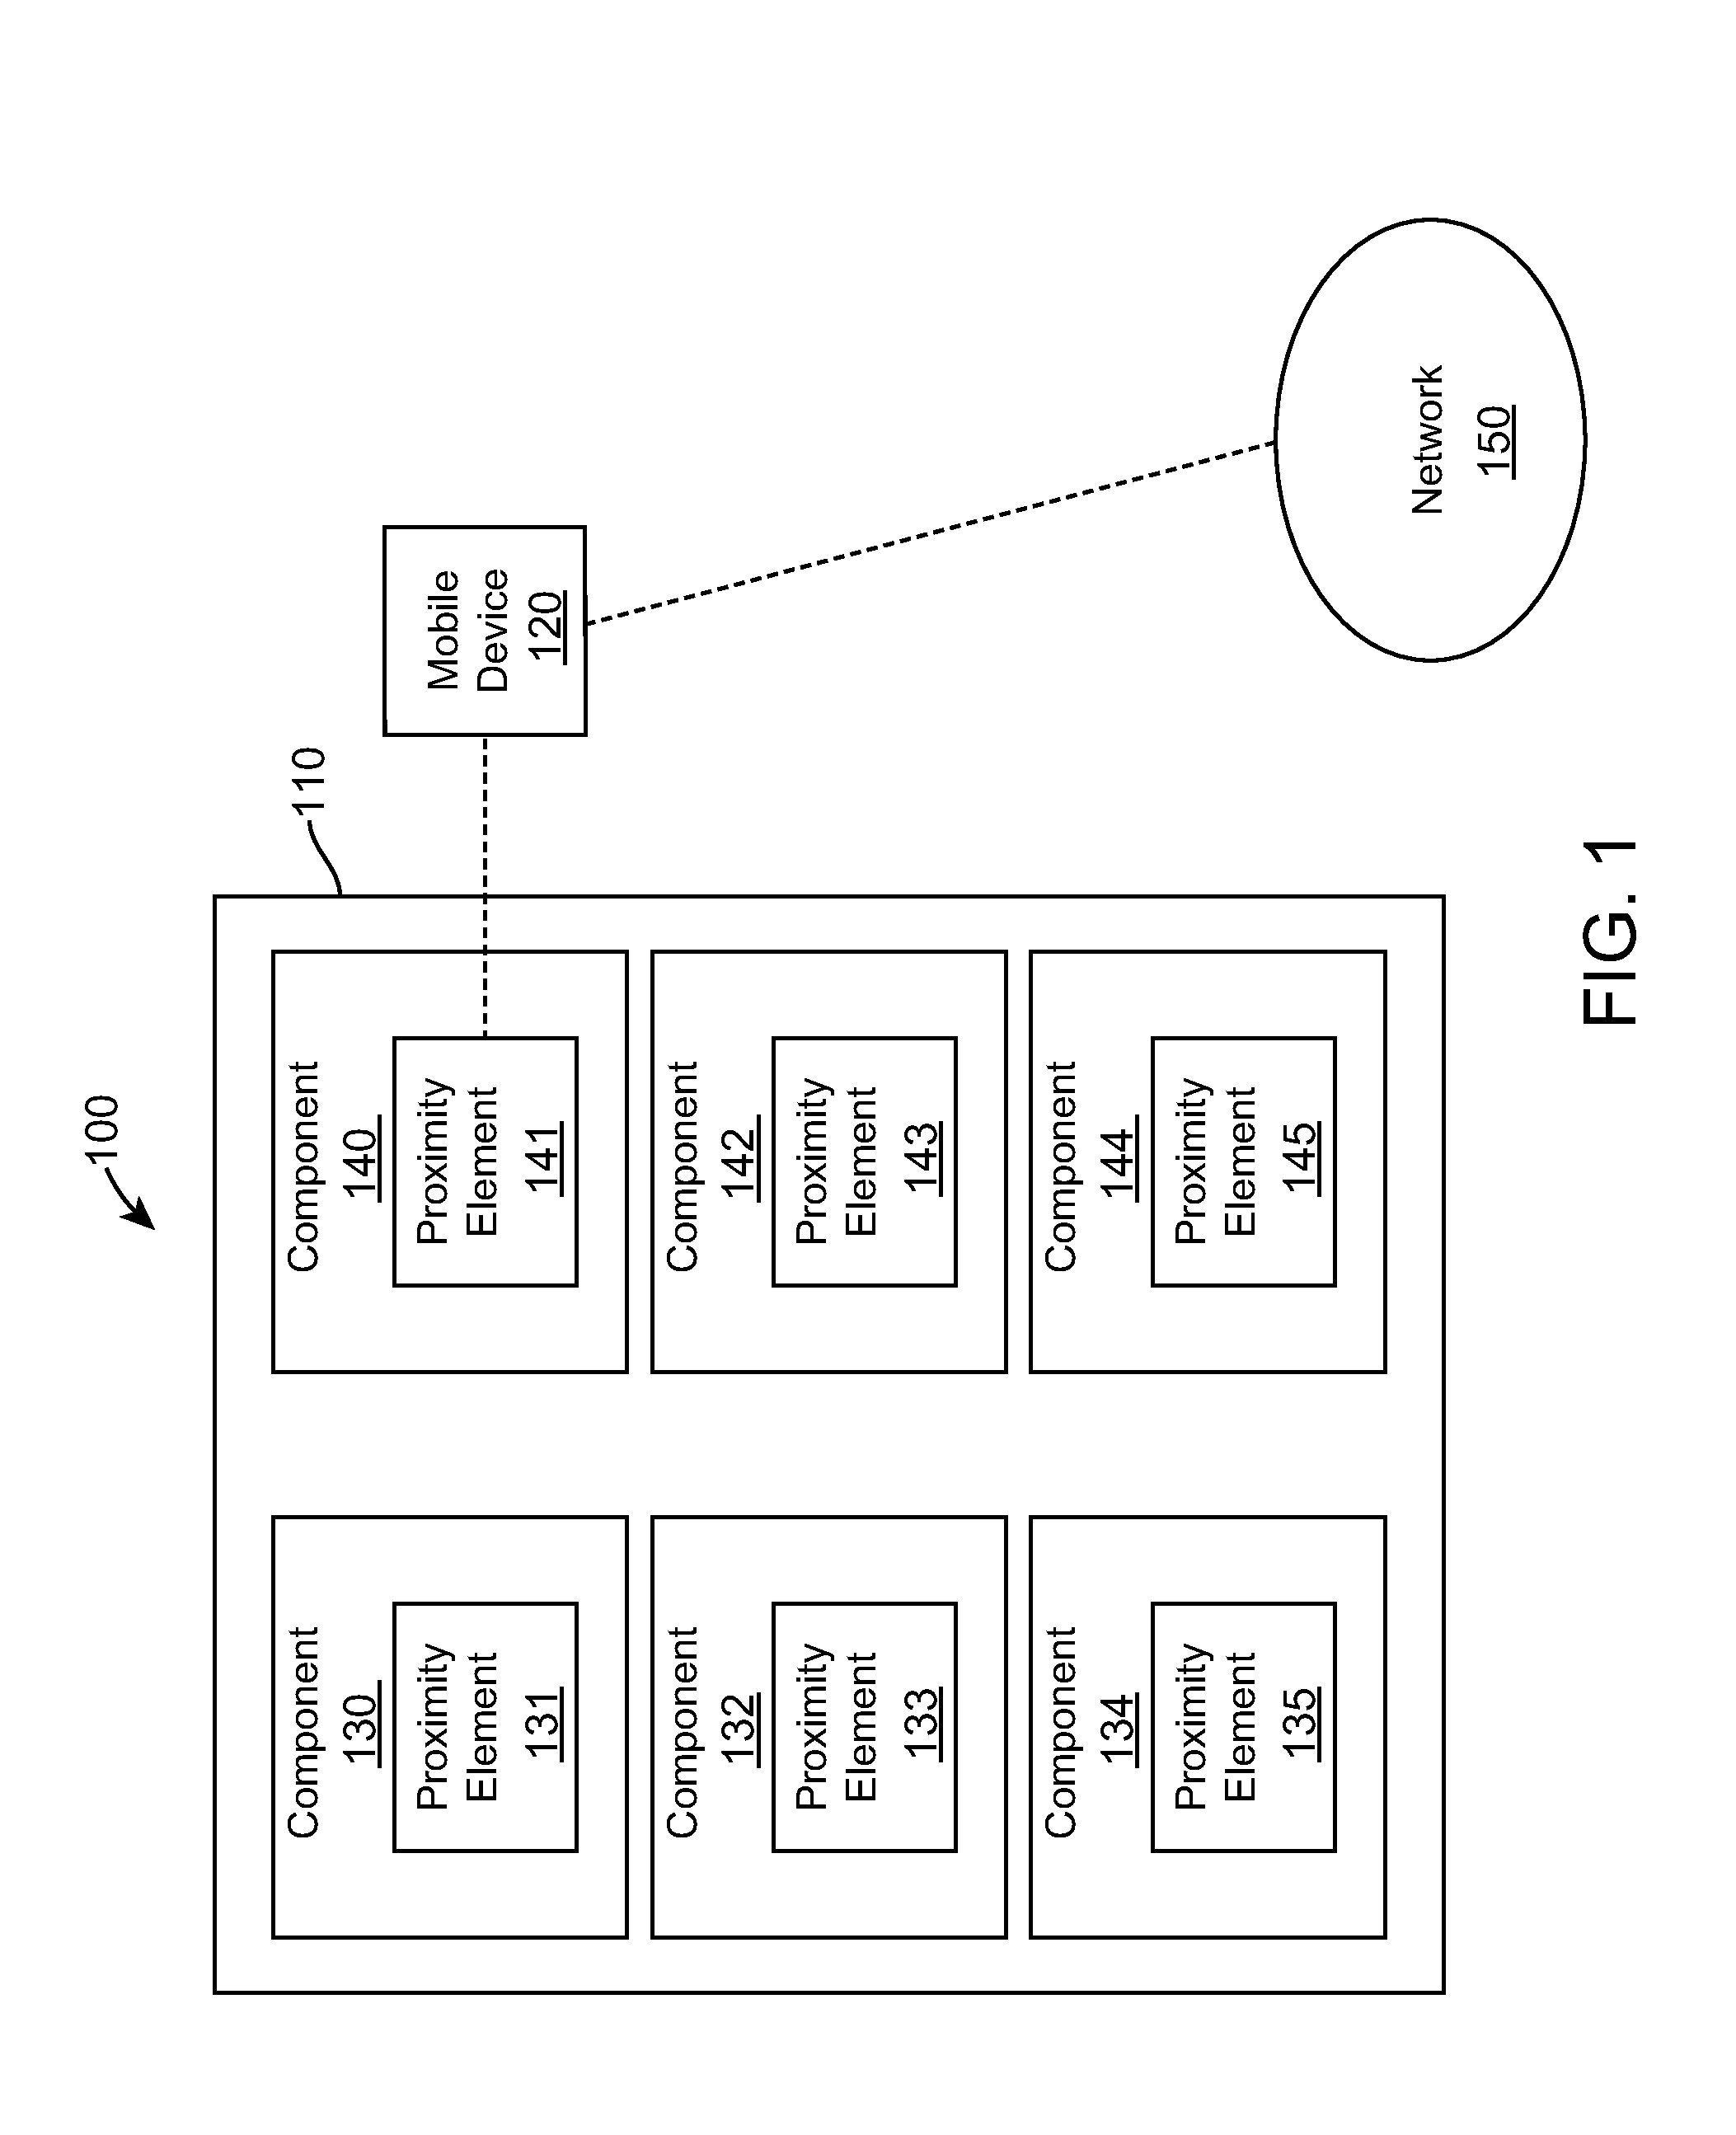 Content identification and retrieval based on device component proximity